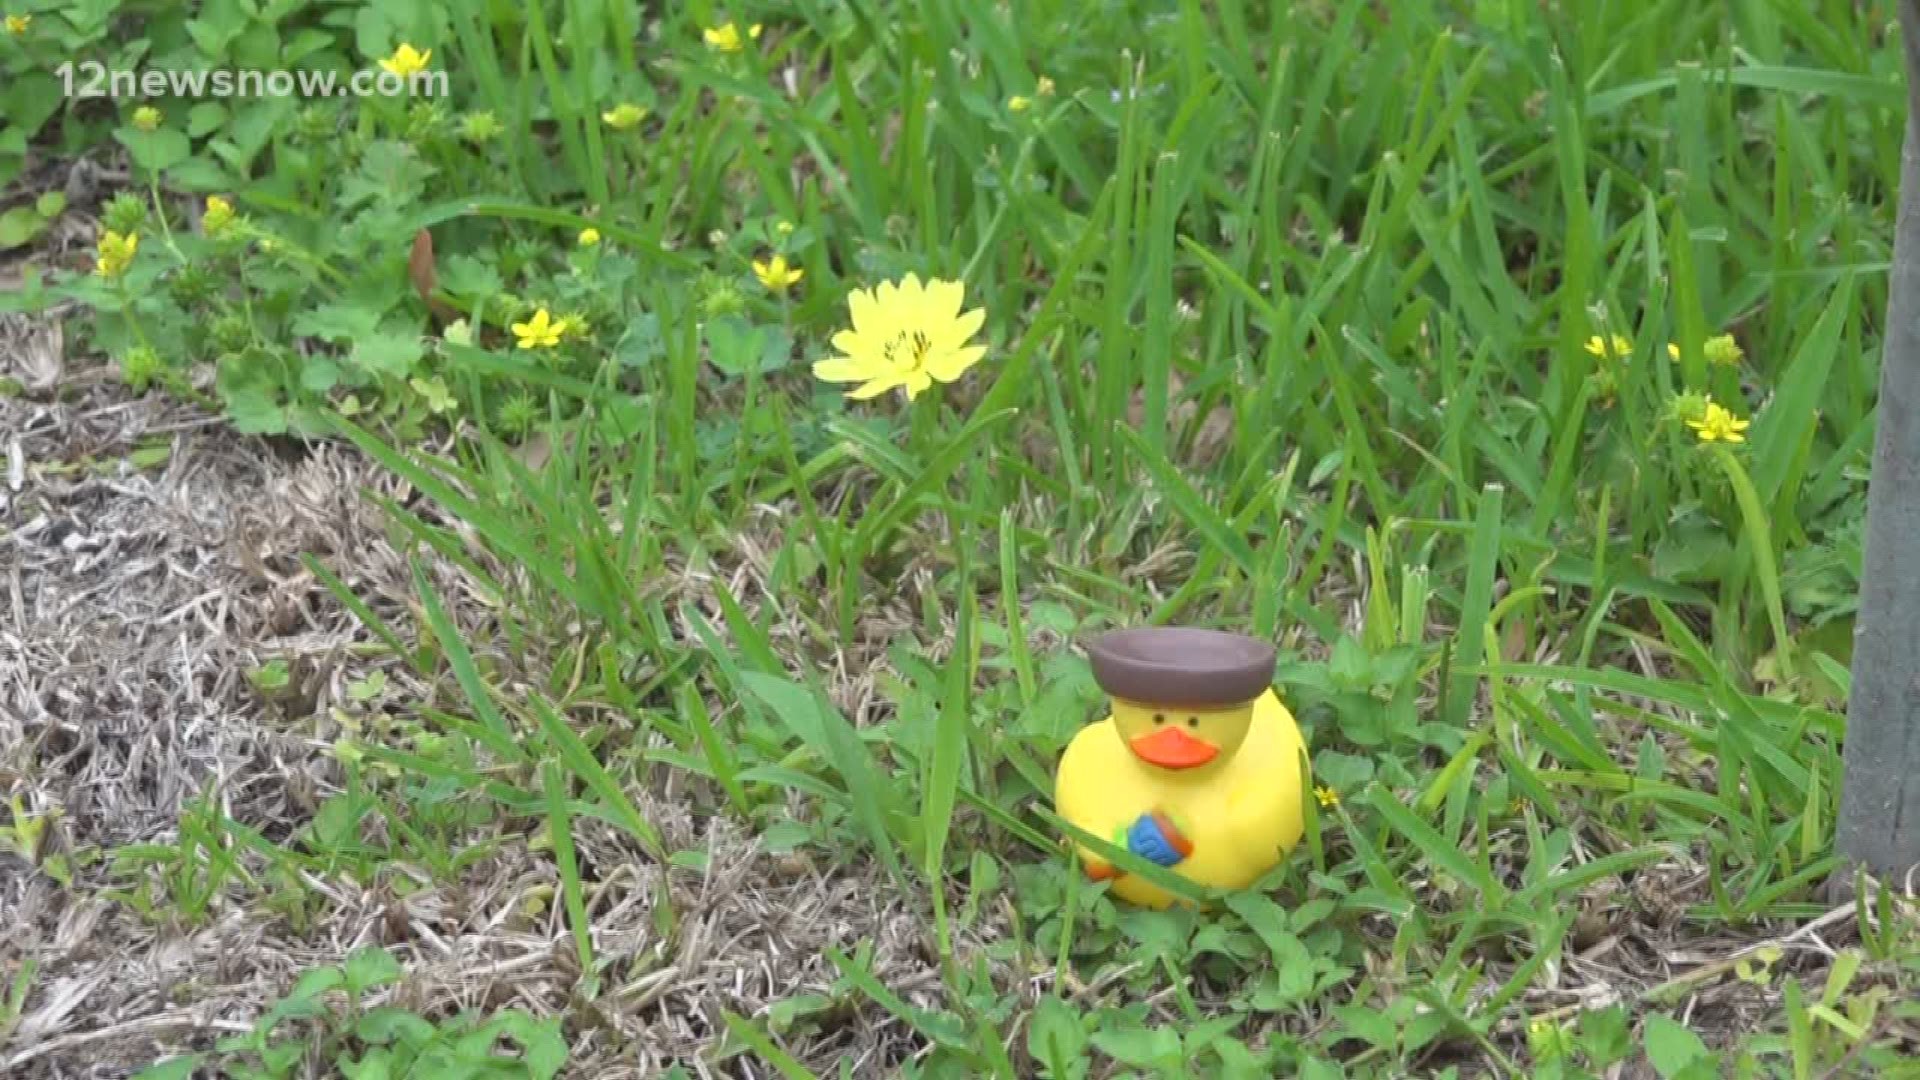 A flock of rubber duckies have taken over parts of the town. They're all apart of a new game to help keep kids entertained, and spread a little cheer.